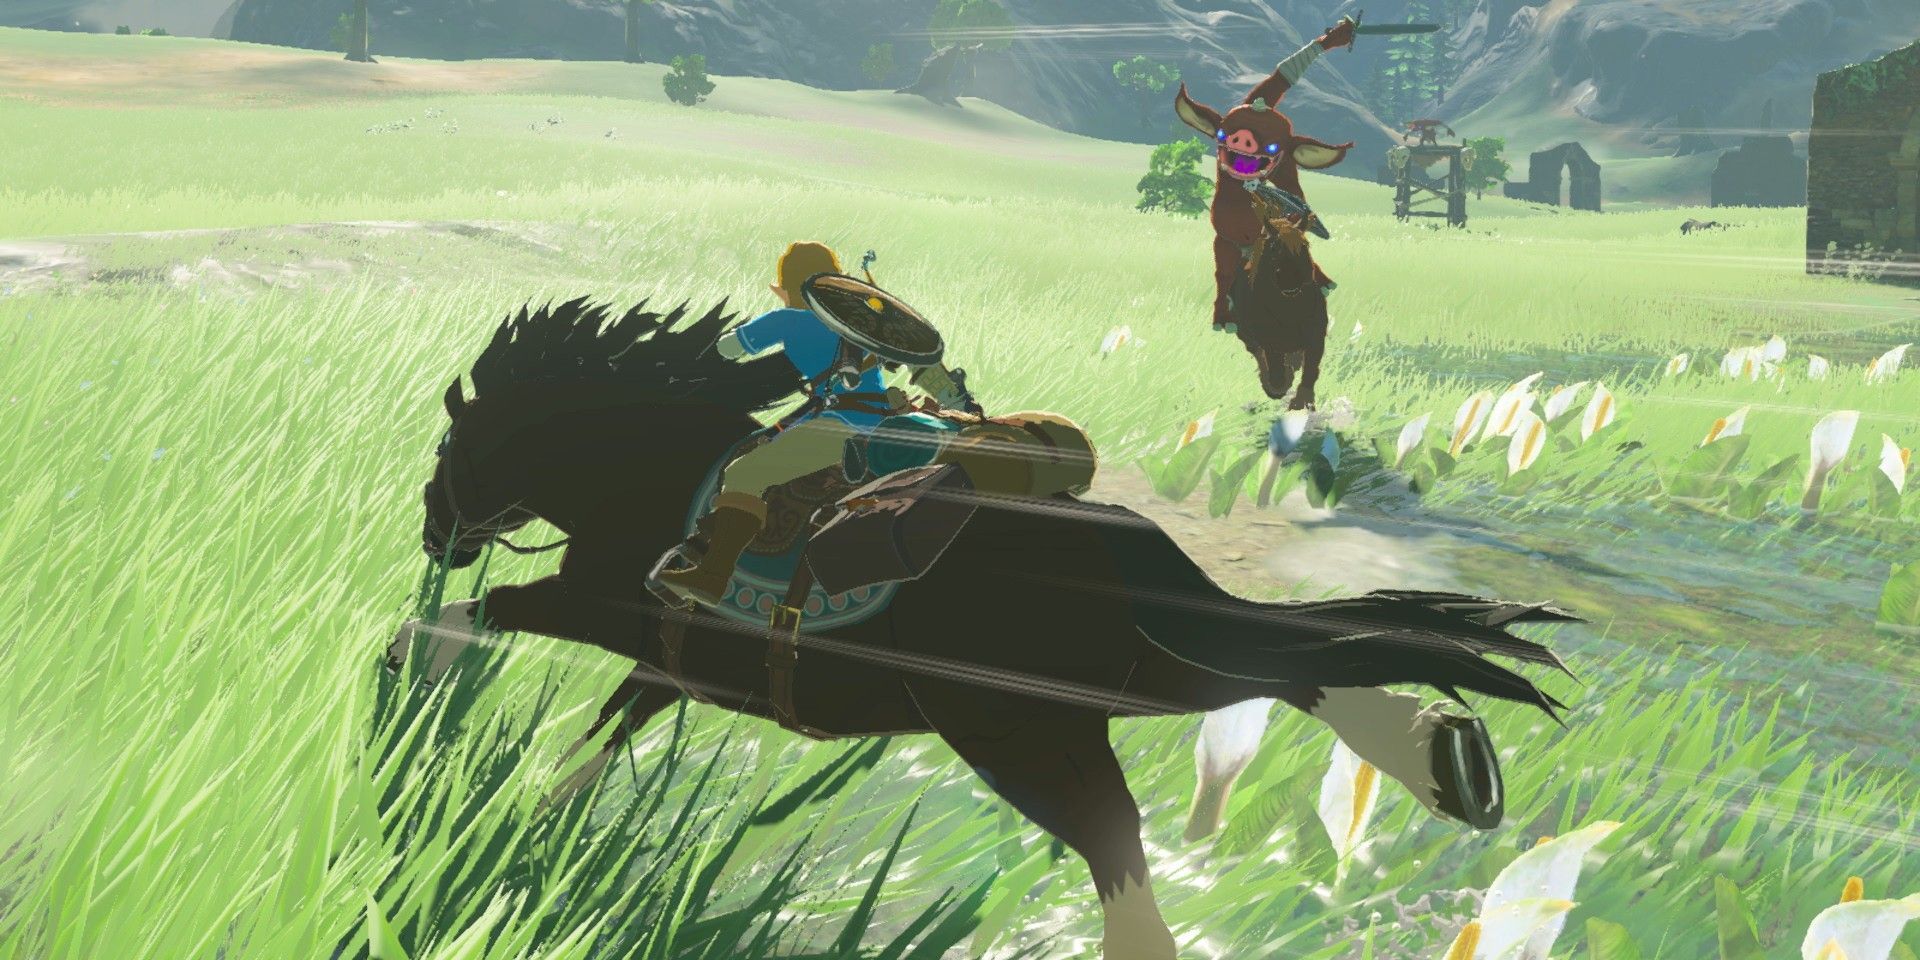 Link riding a horse around in The Legend of Zelda: Breath of the Wild's grassy open world.